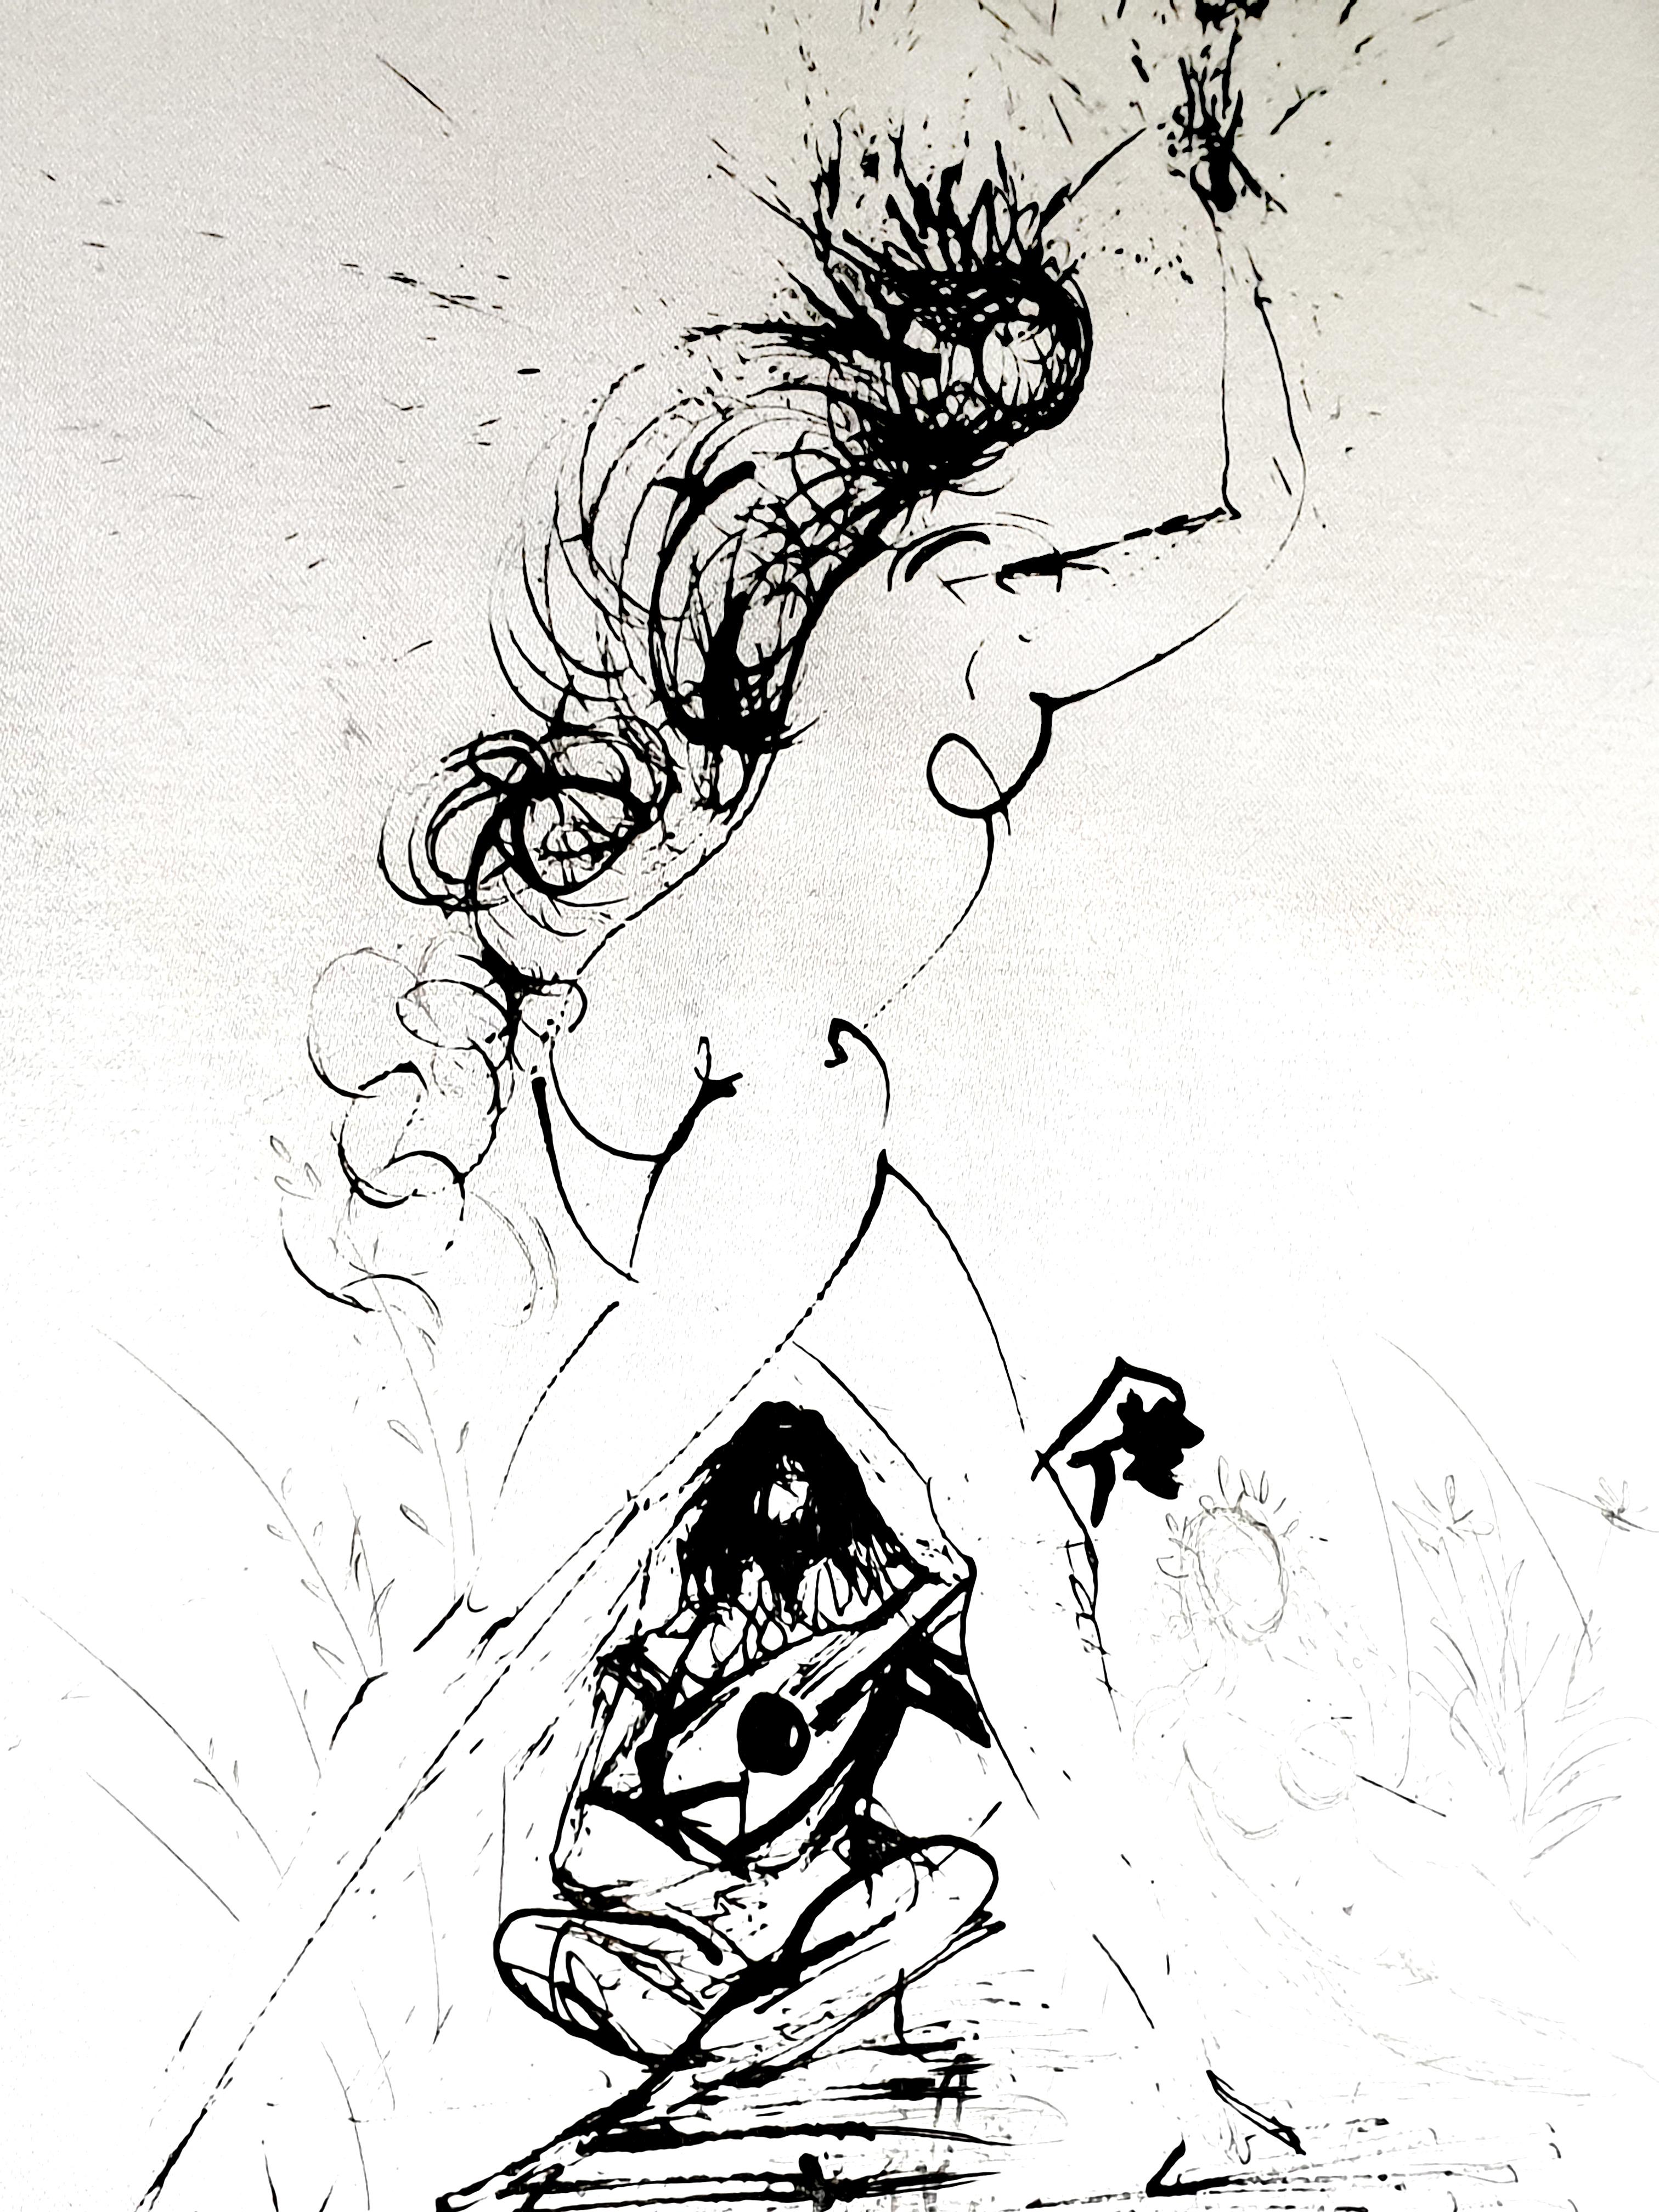 Salvador Dali - Girl With Torch - Original Etching on Silk - Gray Figurative Print by Salvador Dalí